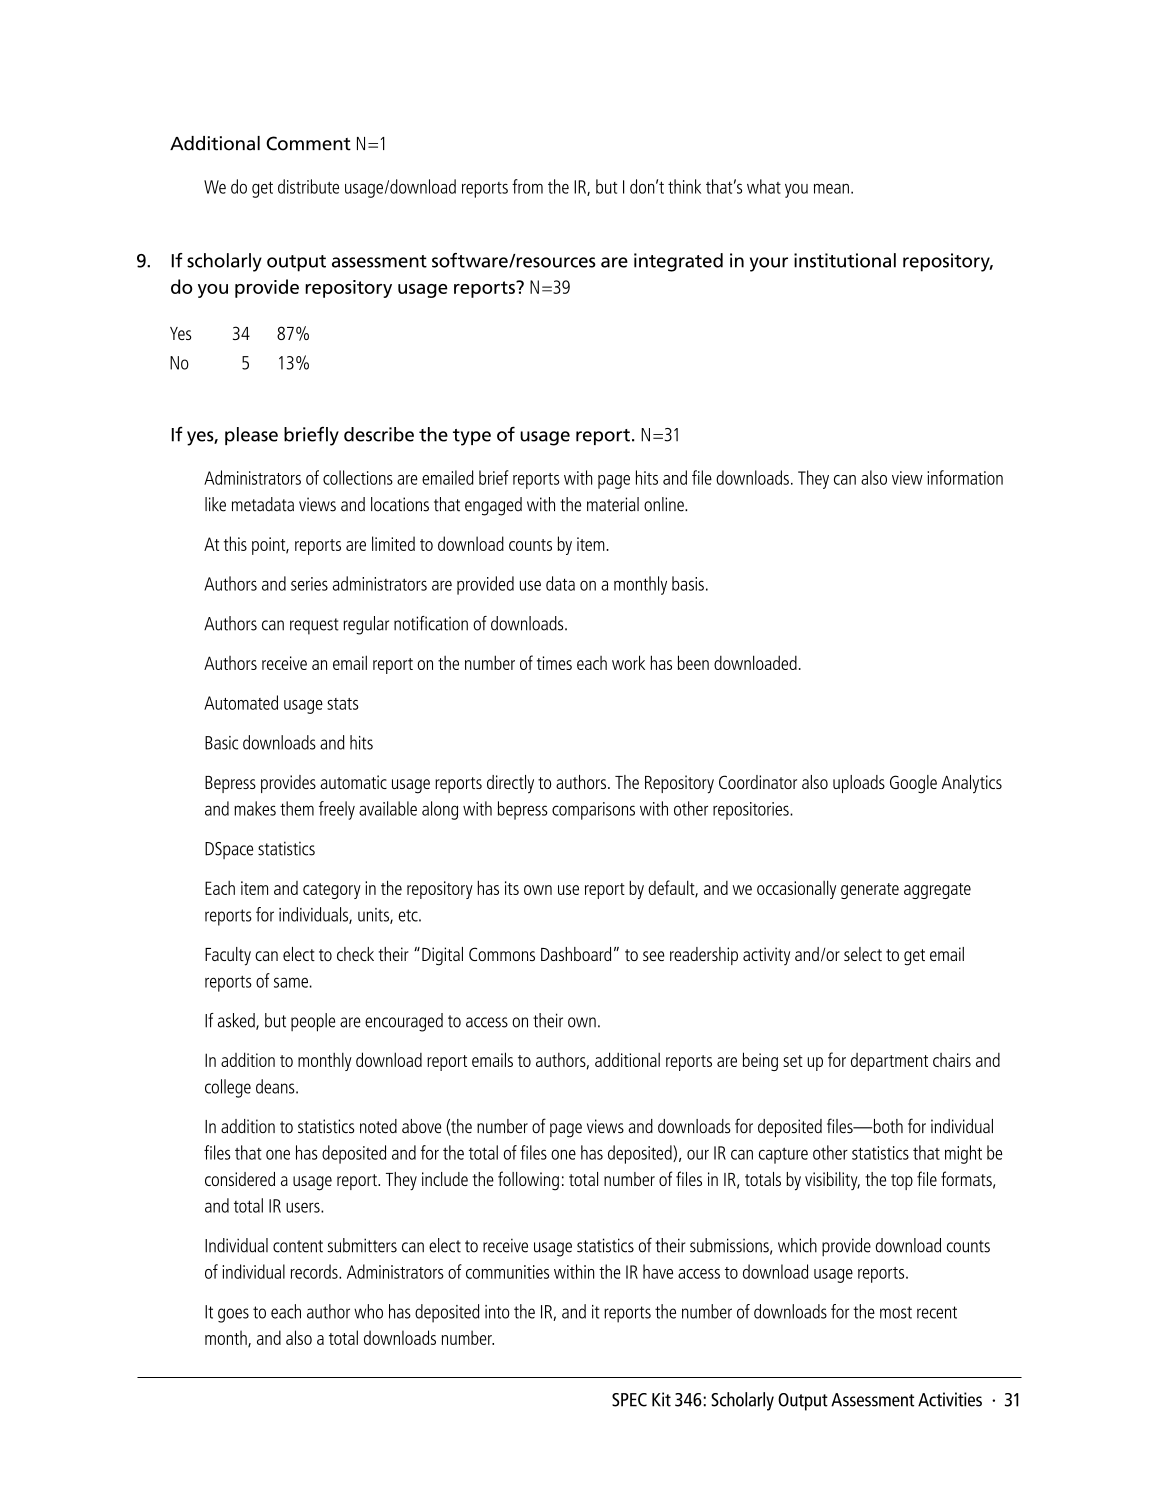 SPEC Kit 346: Scholarly Output Assessment Activities (May 2015) page 31